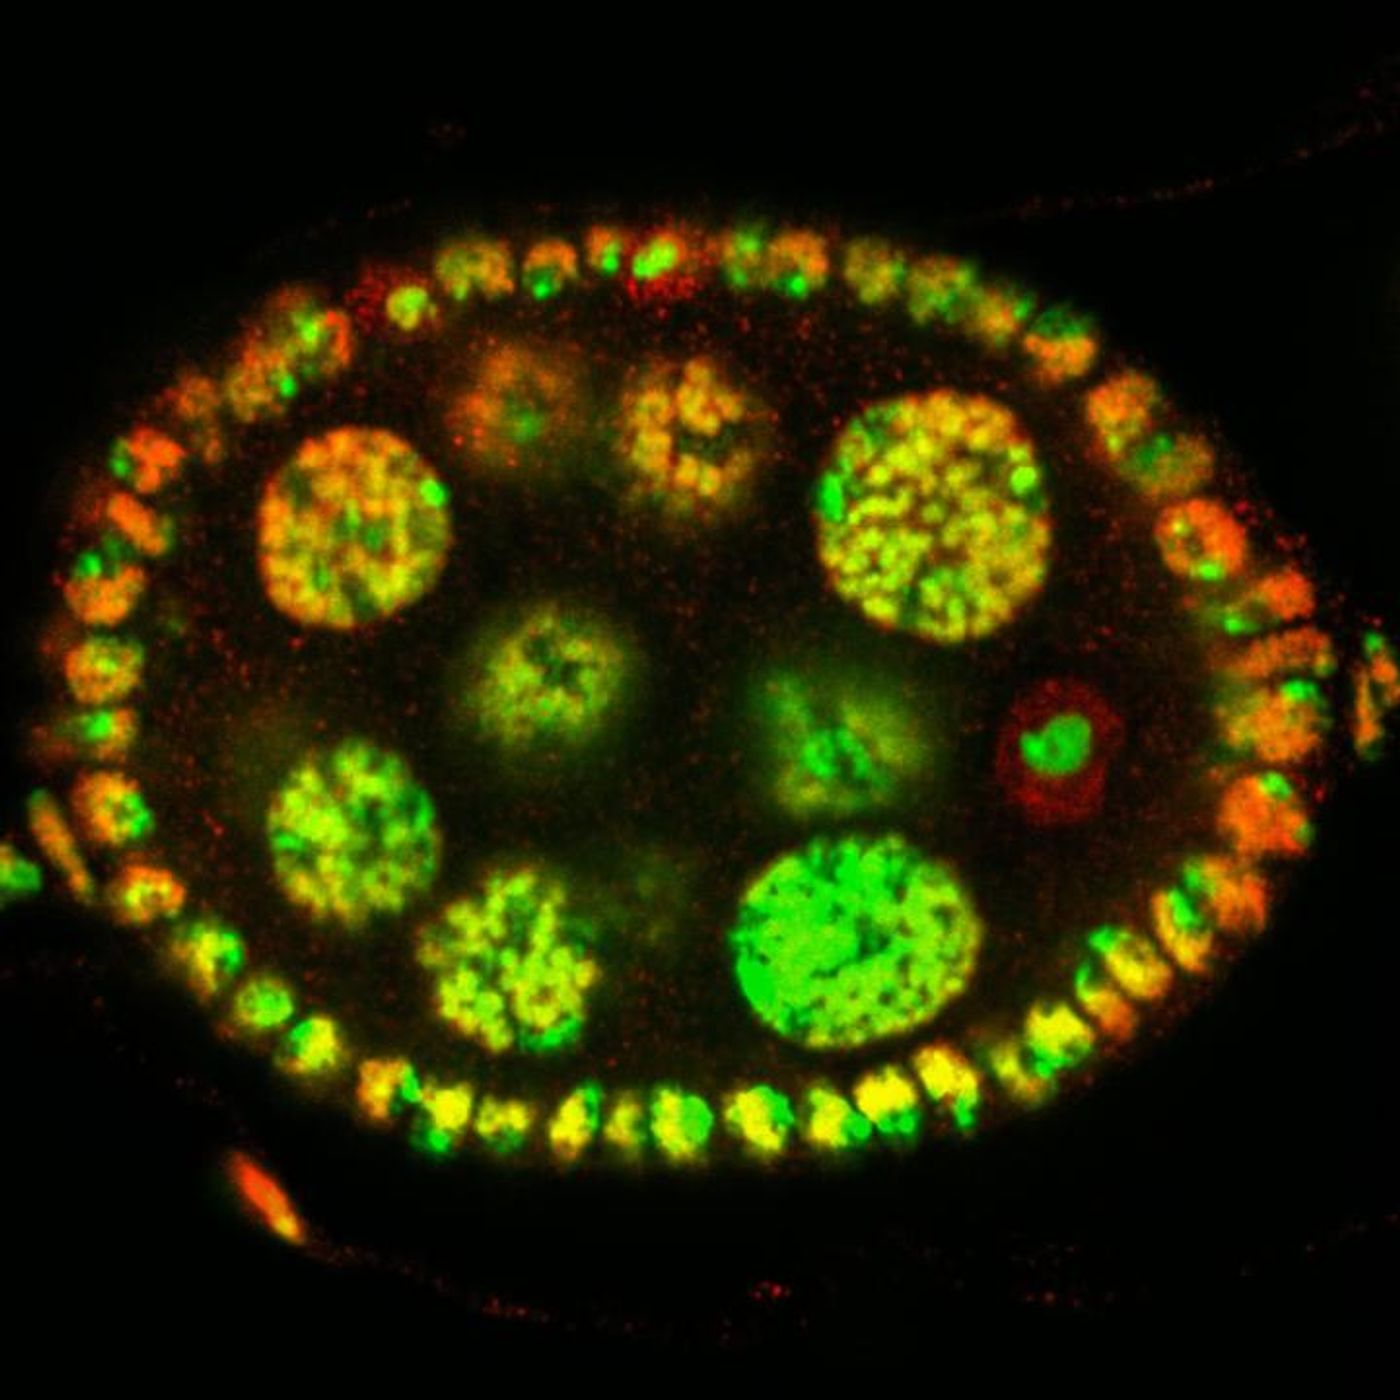 Ovarian follicle of fruit fly, with chromosomes stained in green and dKDM5 protein stained in red. / Credit: Paulo Navarro-Costa, IGC.